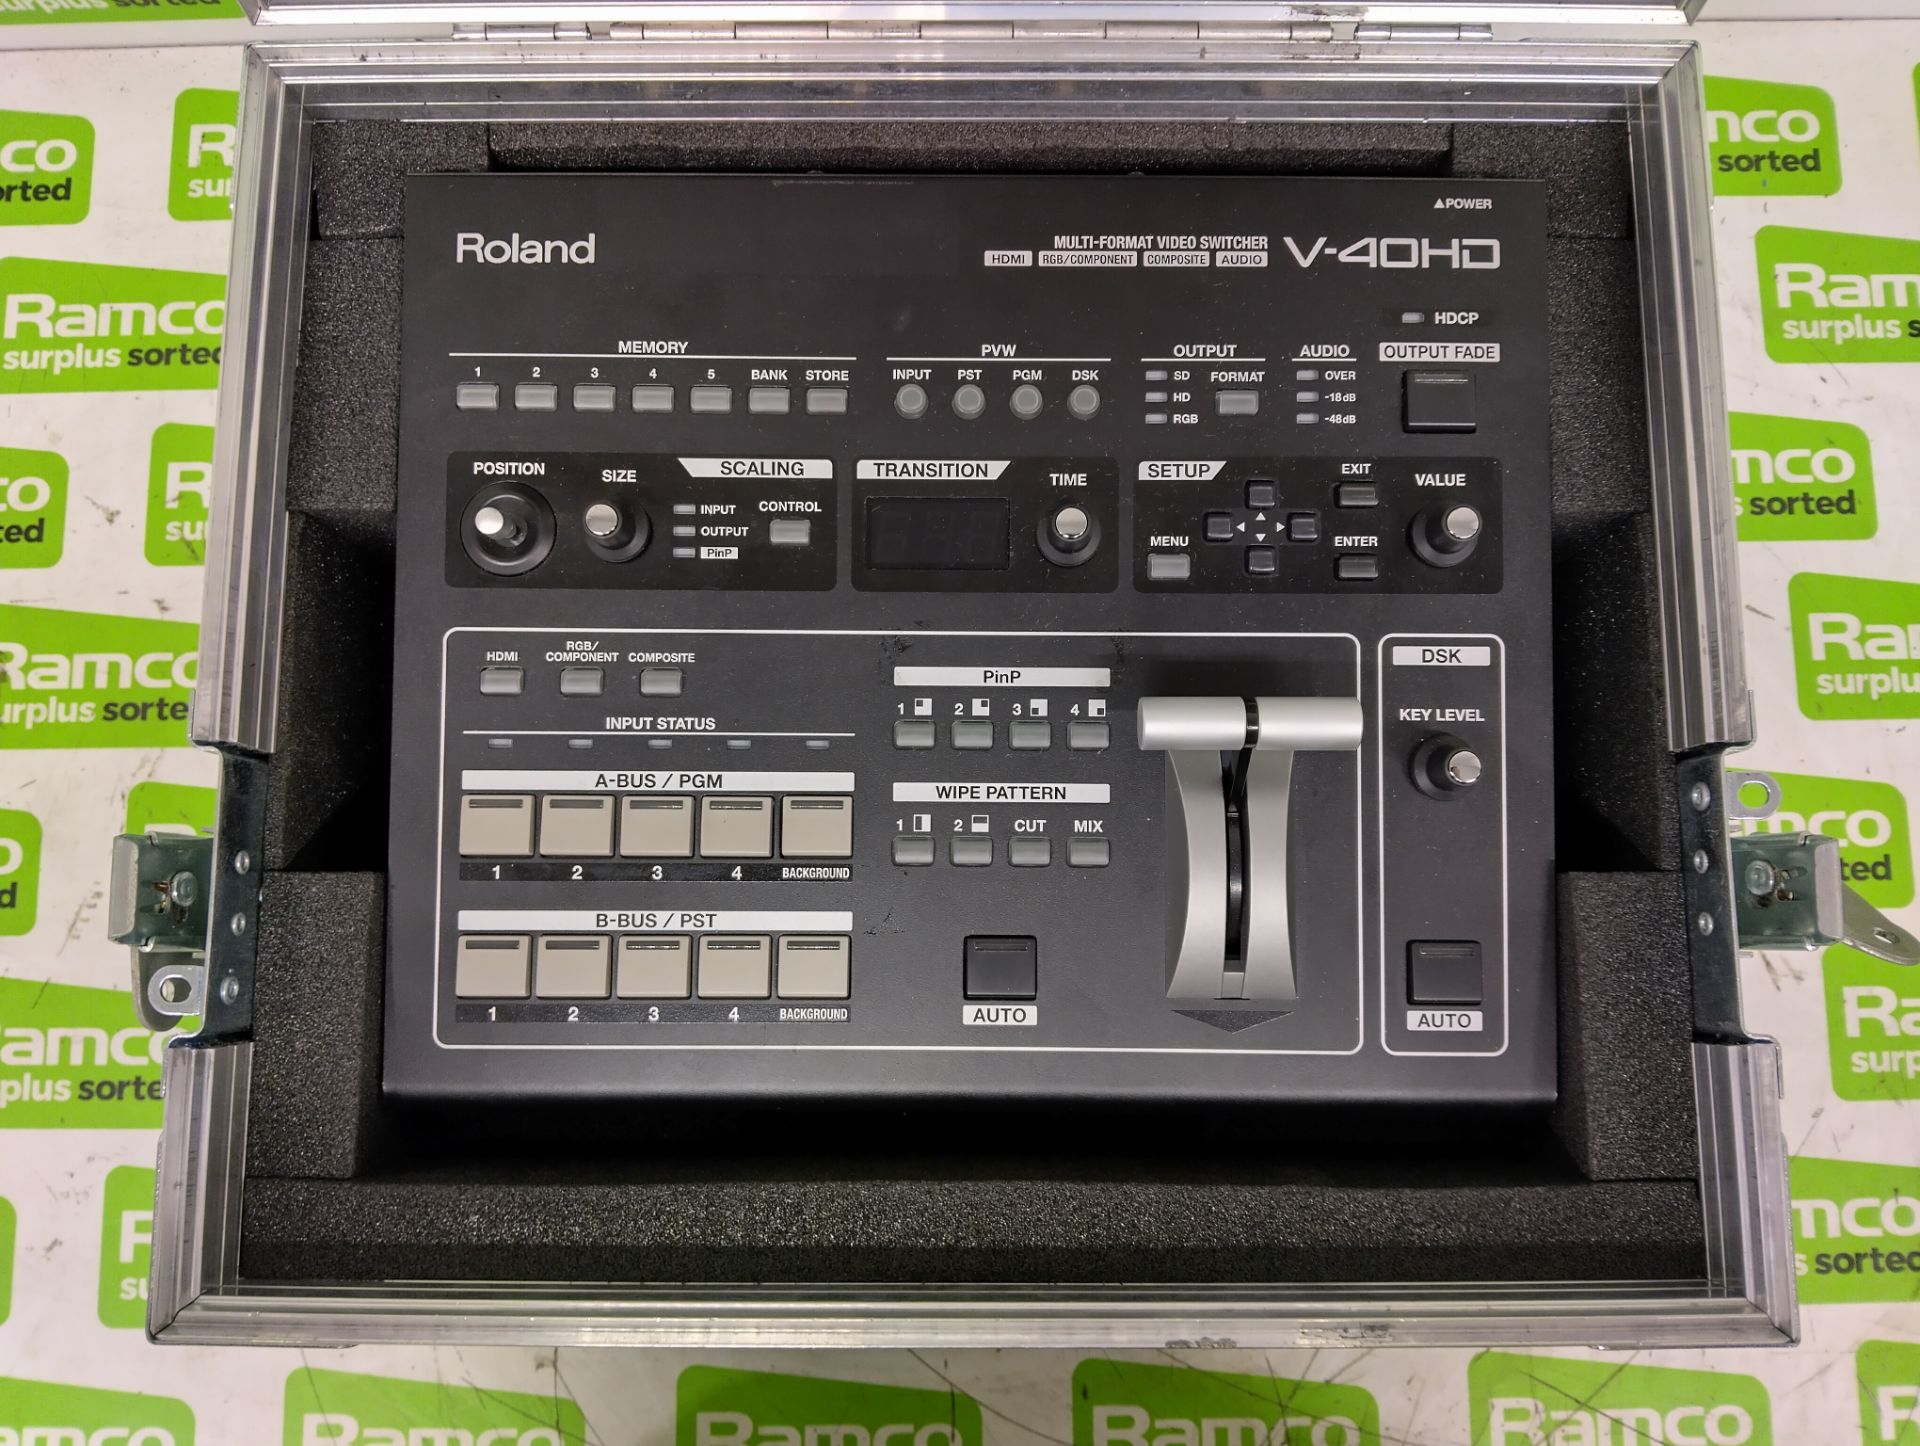 Roland V-40HD multi-format video switcher with flight case - Image 2 of 6